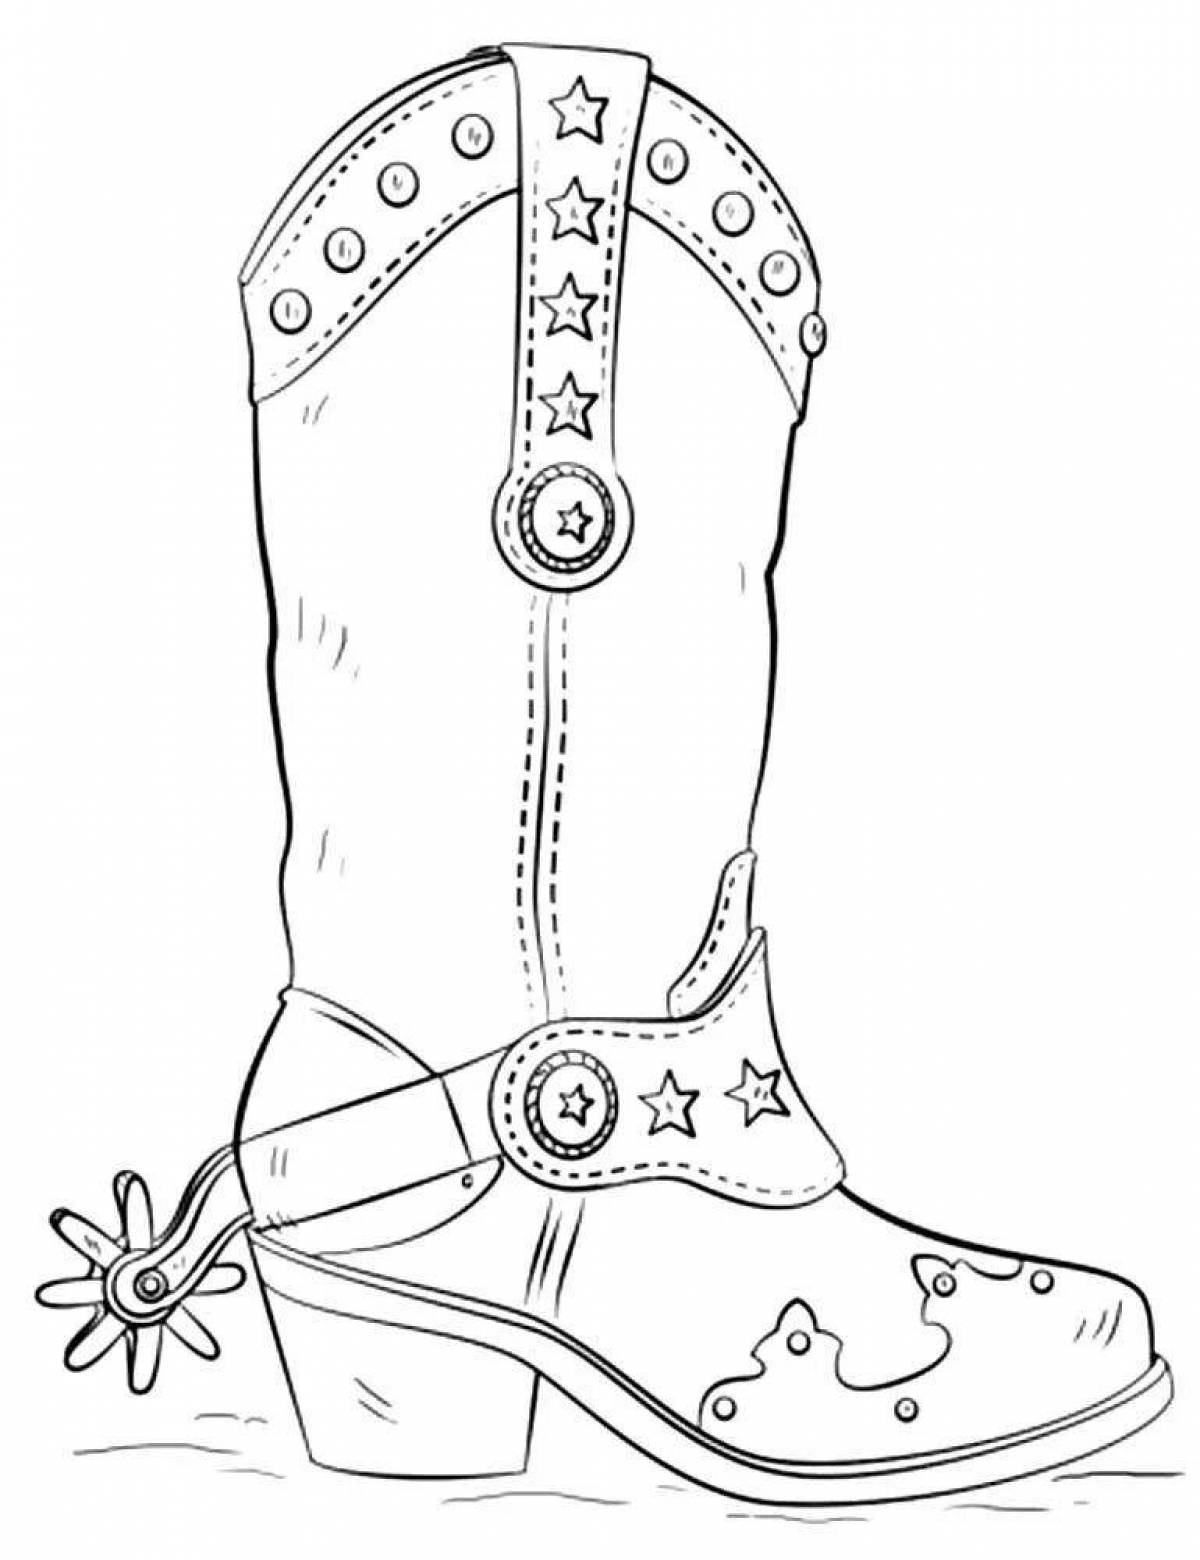 Colorful shoes coloring page